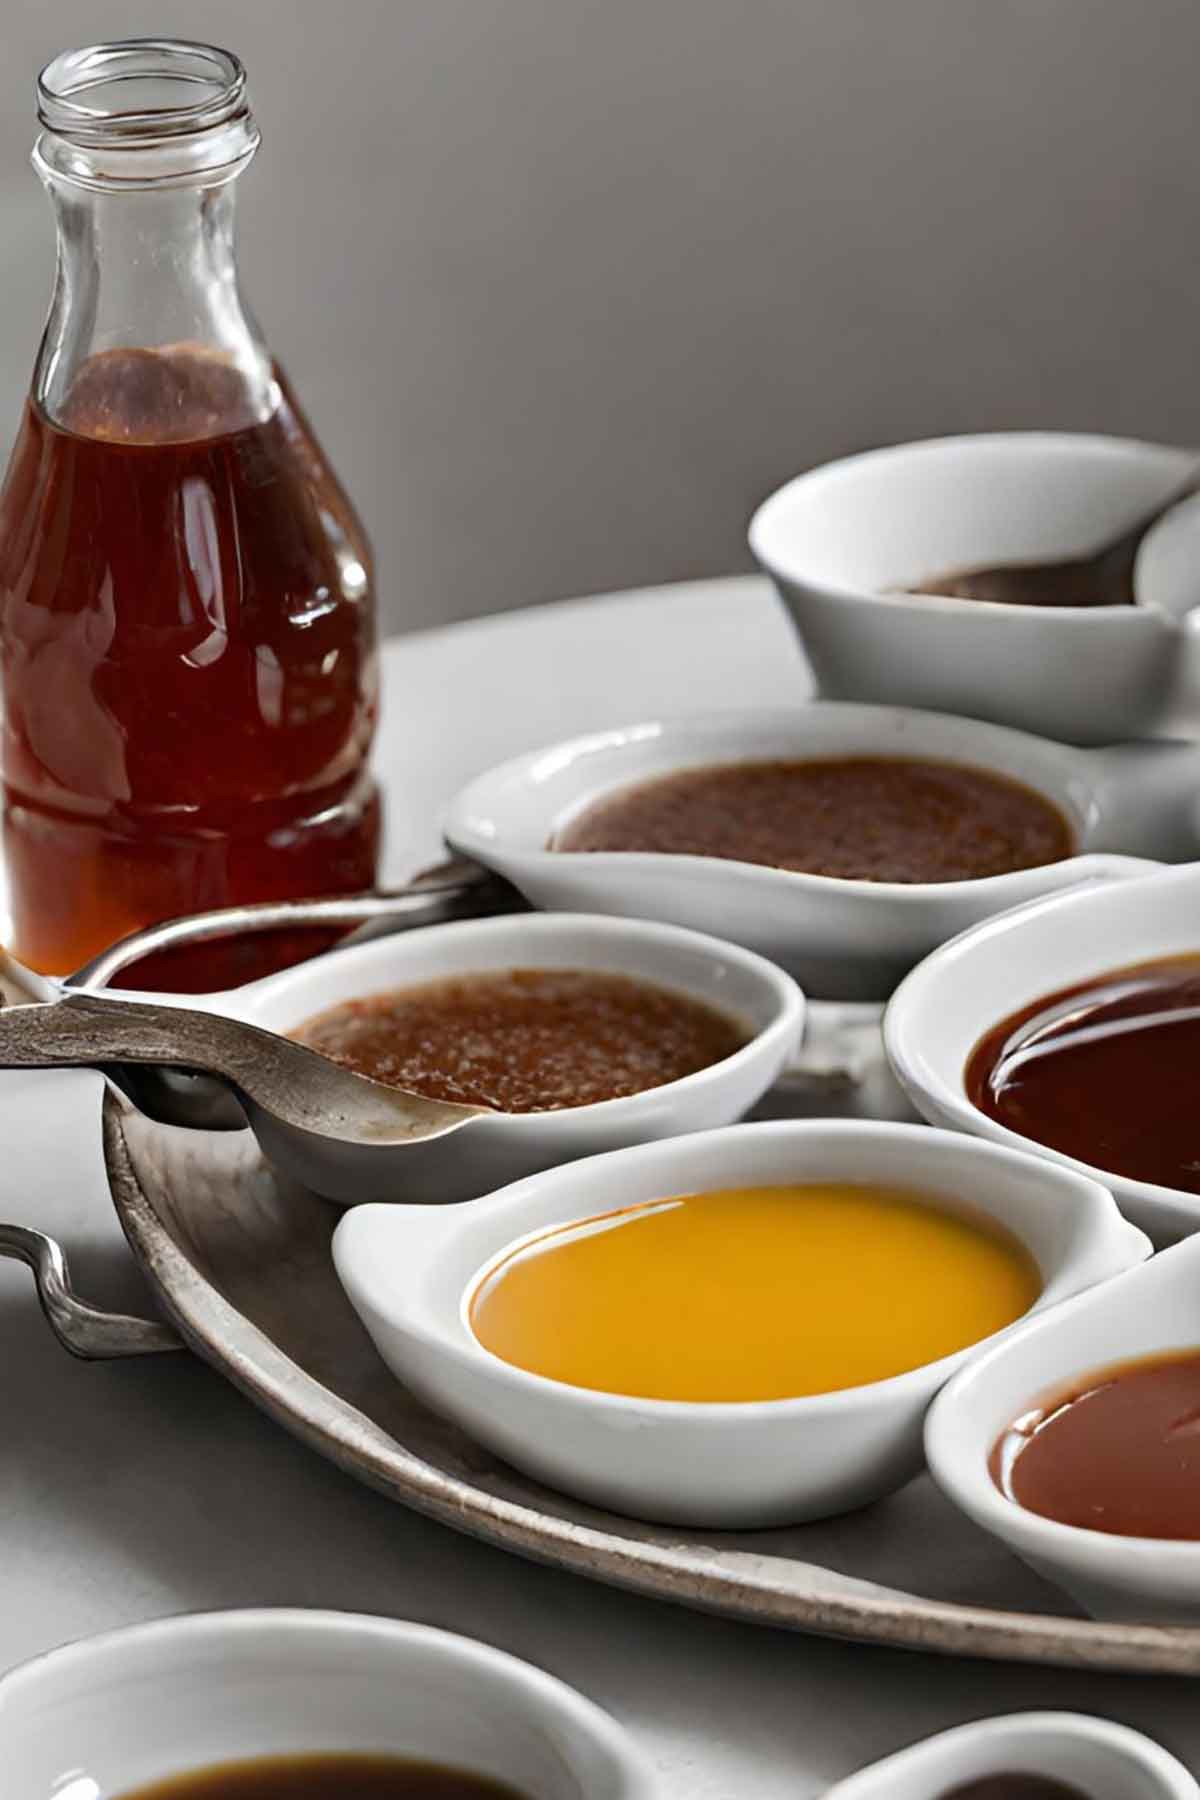 syrups and sauces on a platter